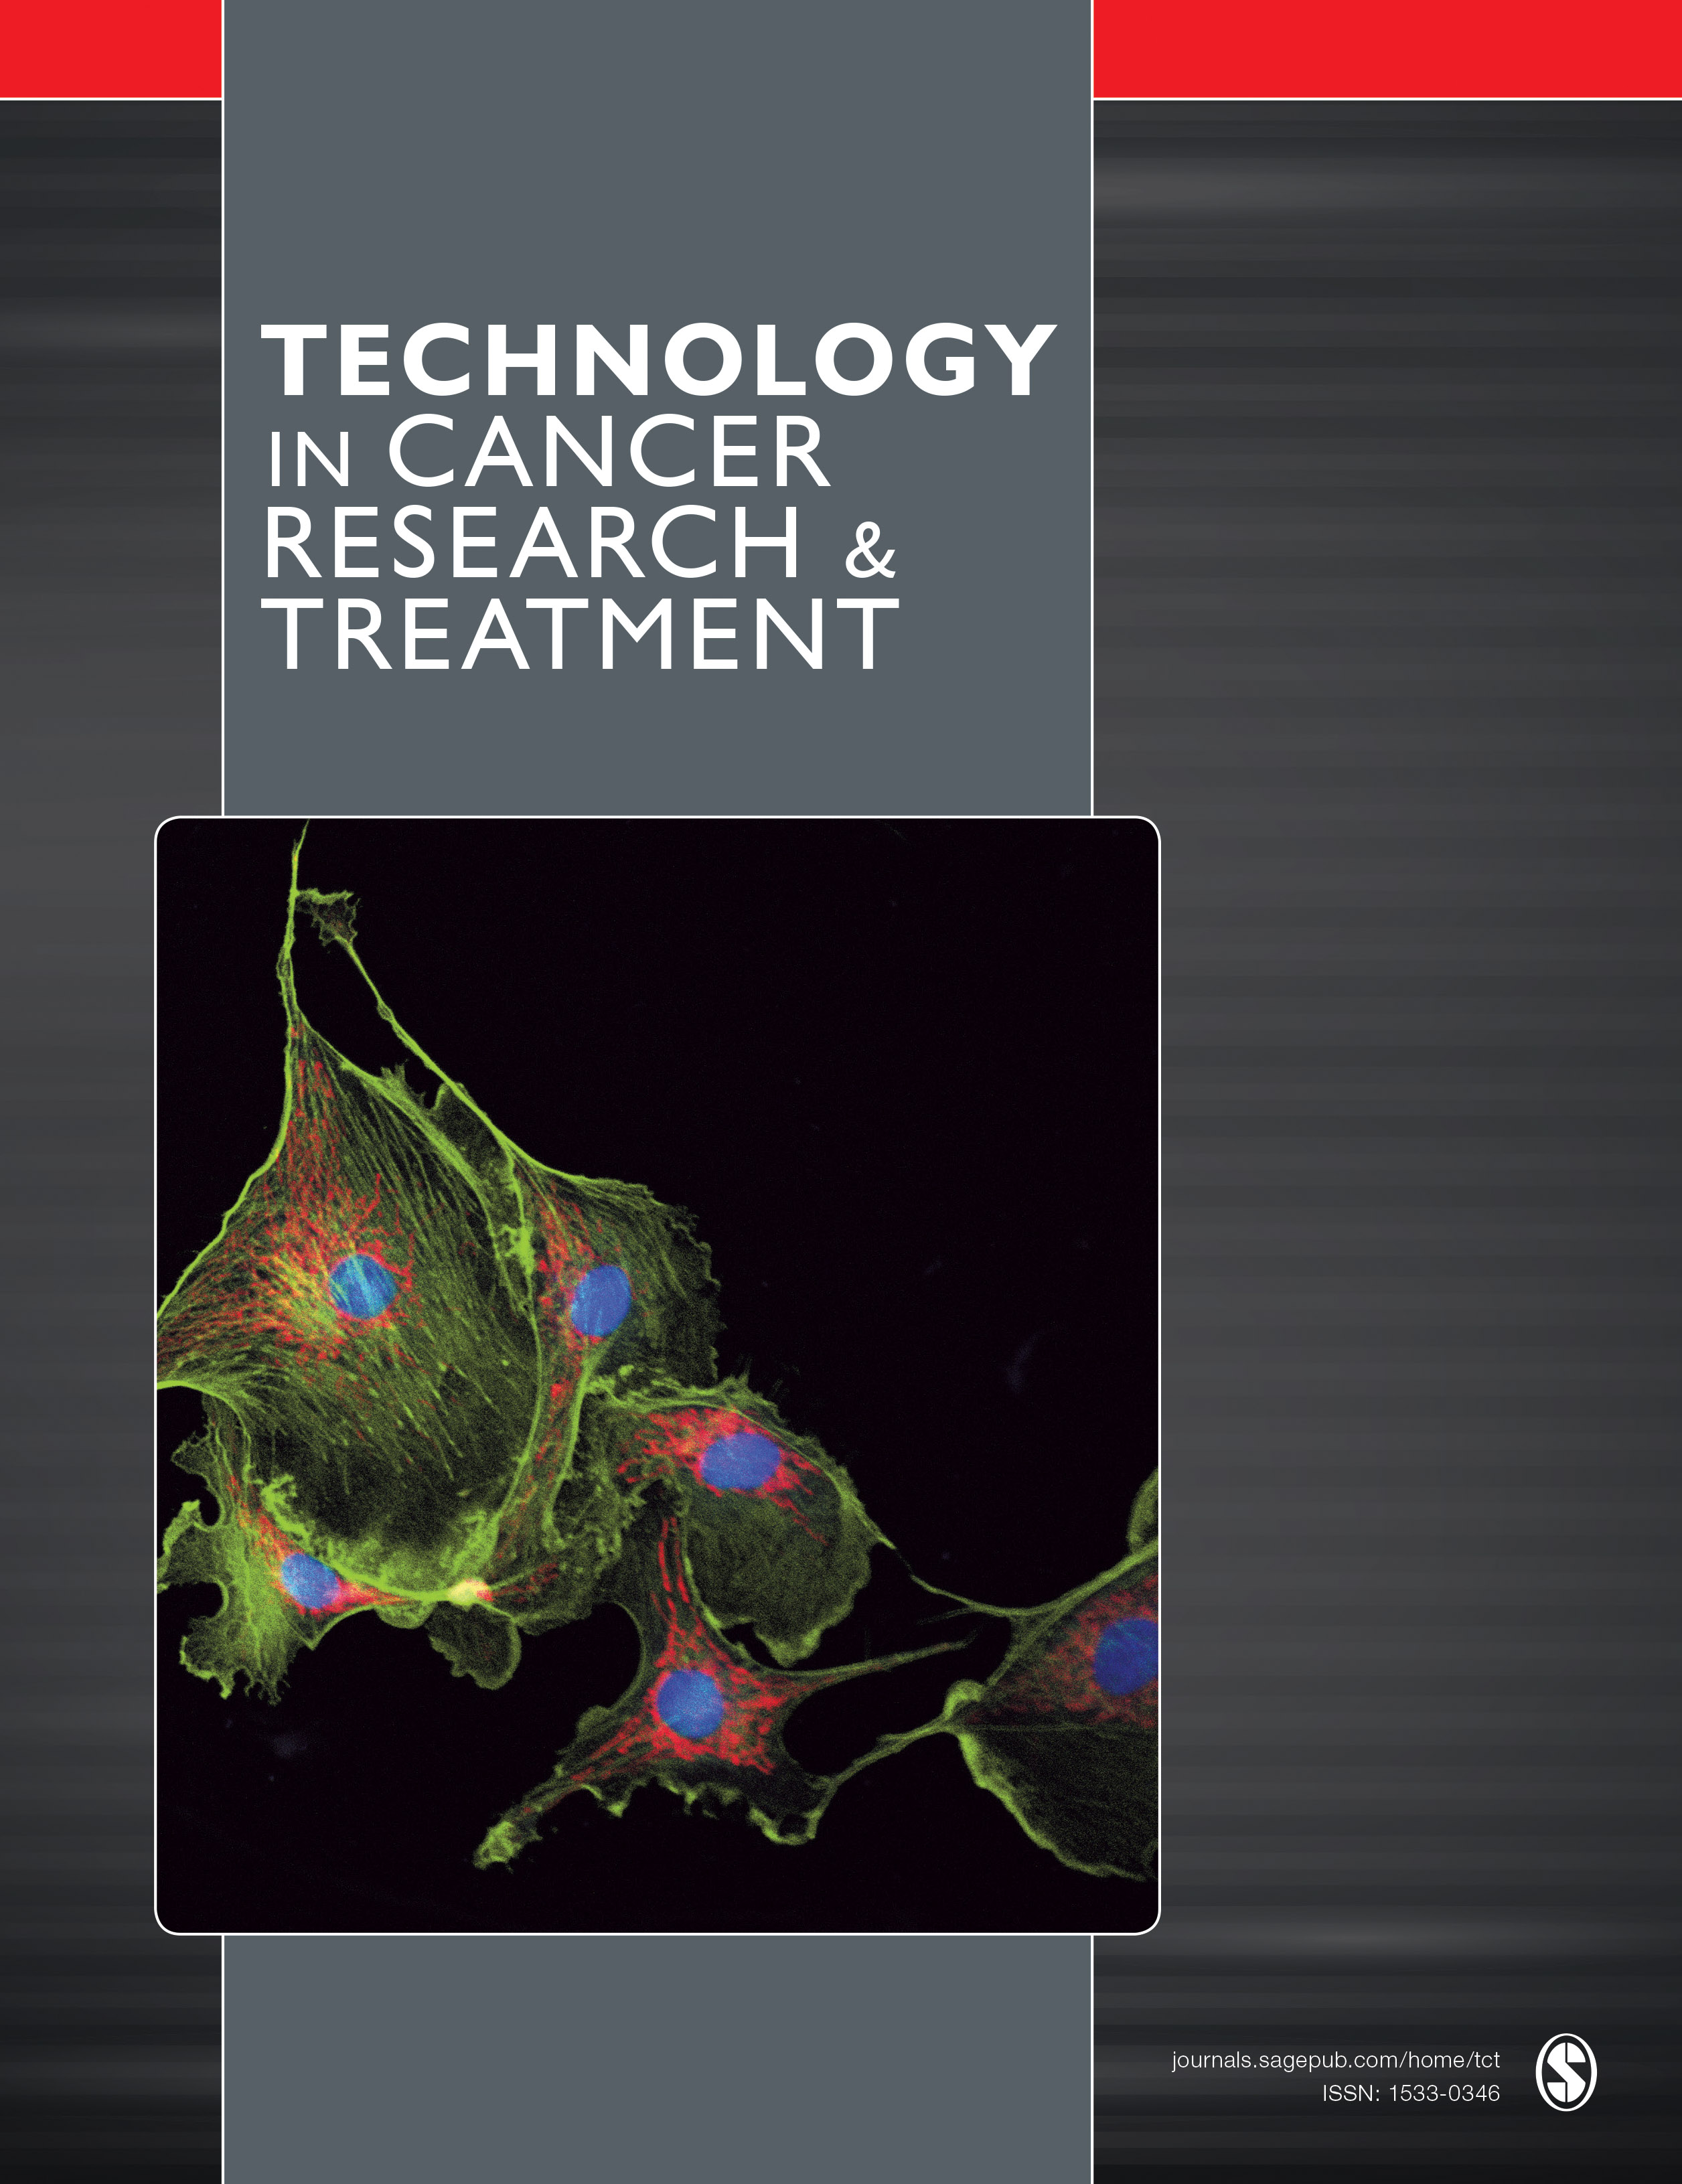 TECHNOLOGY IN CANCER RESEARCH & TREATMENT